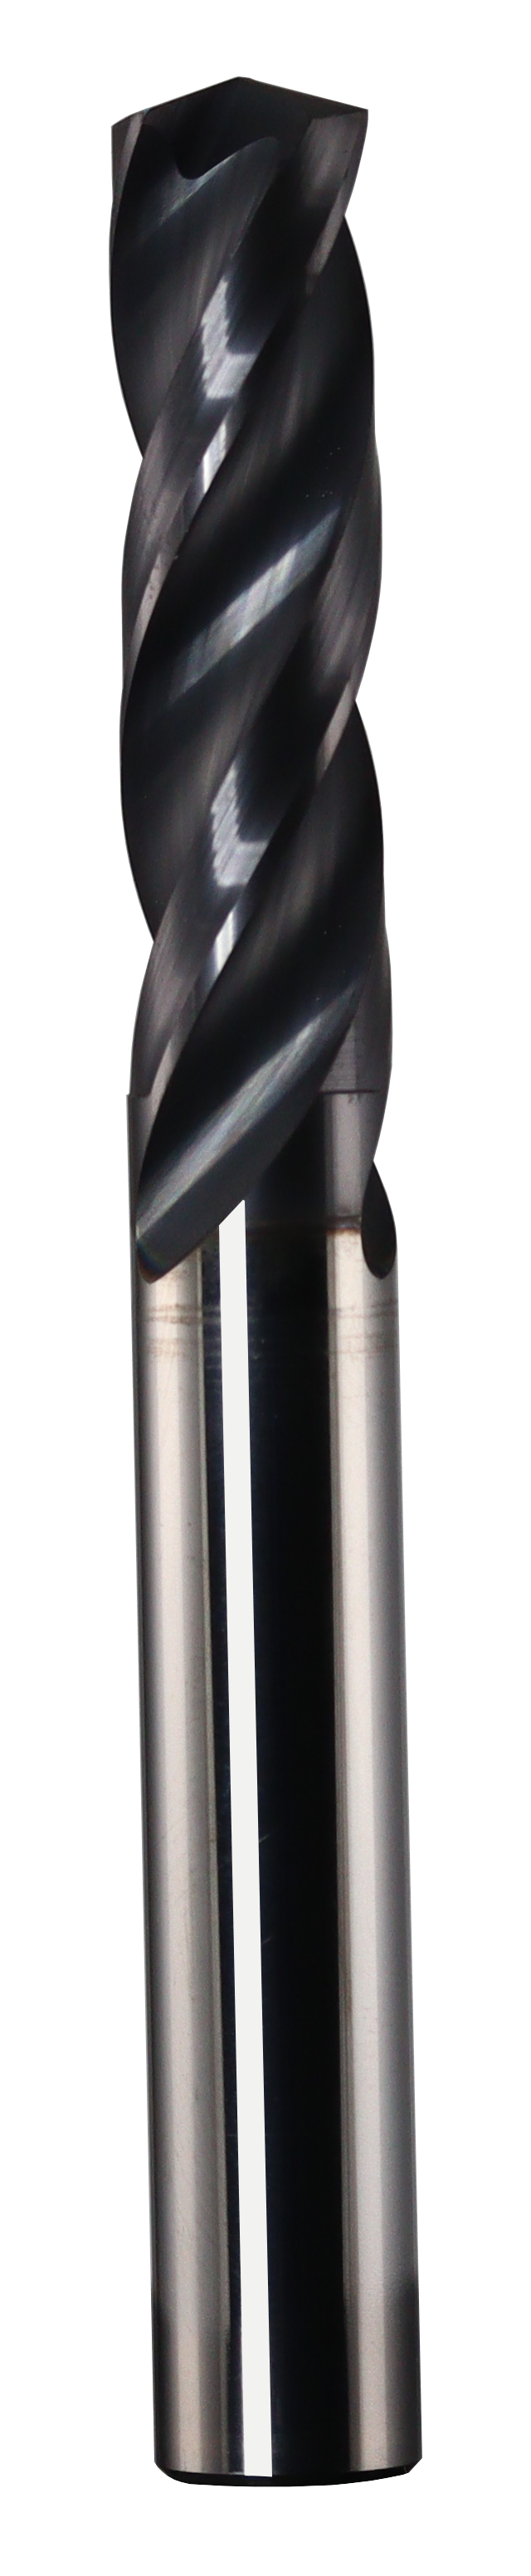 3.20mm Dia, 150 Degree Point, Solid Carbide Drill - 68967